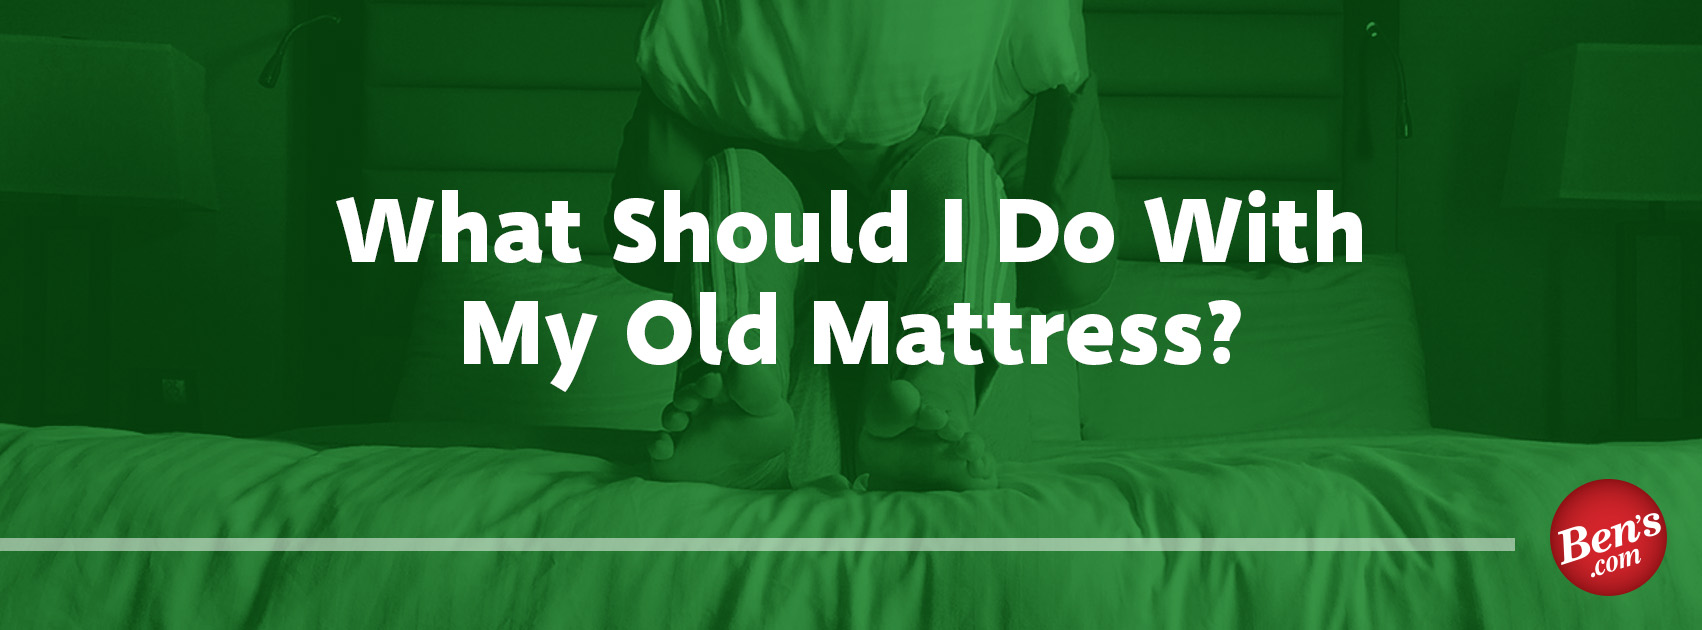 November-1-_-What-Should-I-Do-With-My-Old-Mattress-